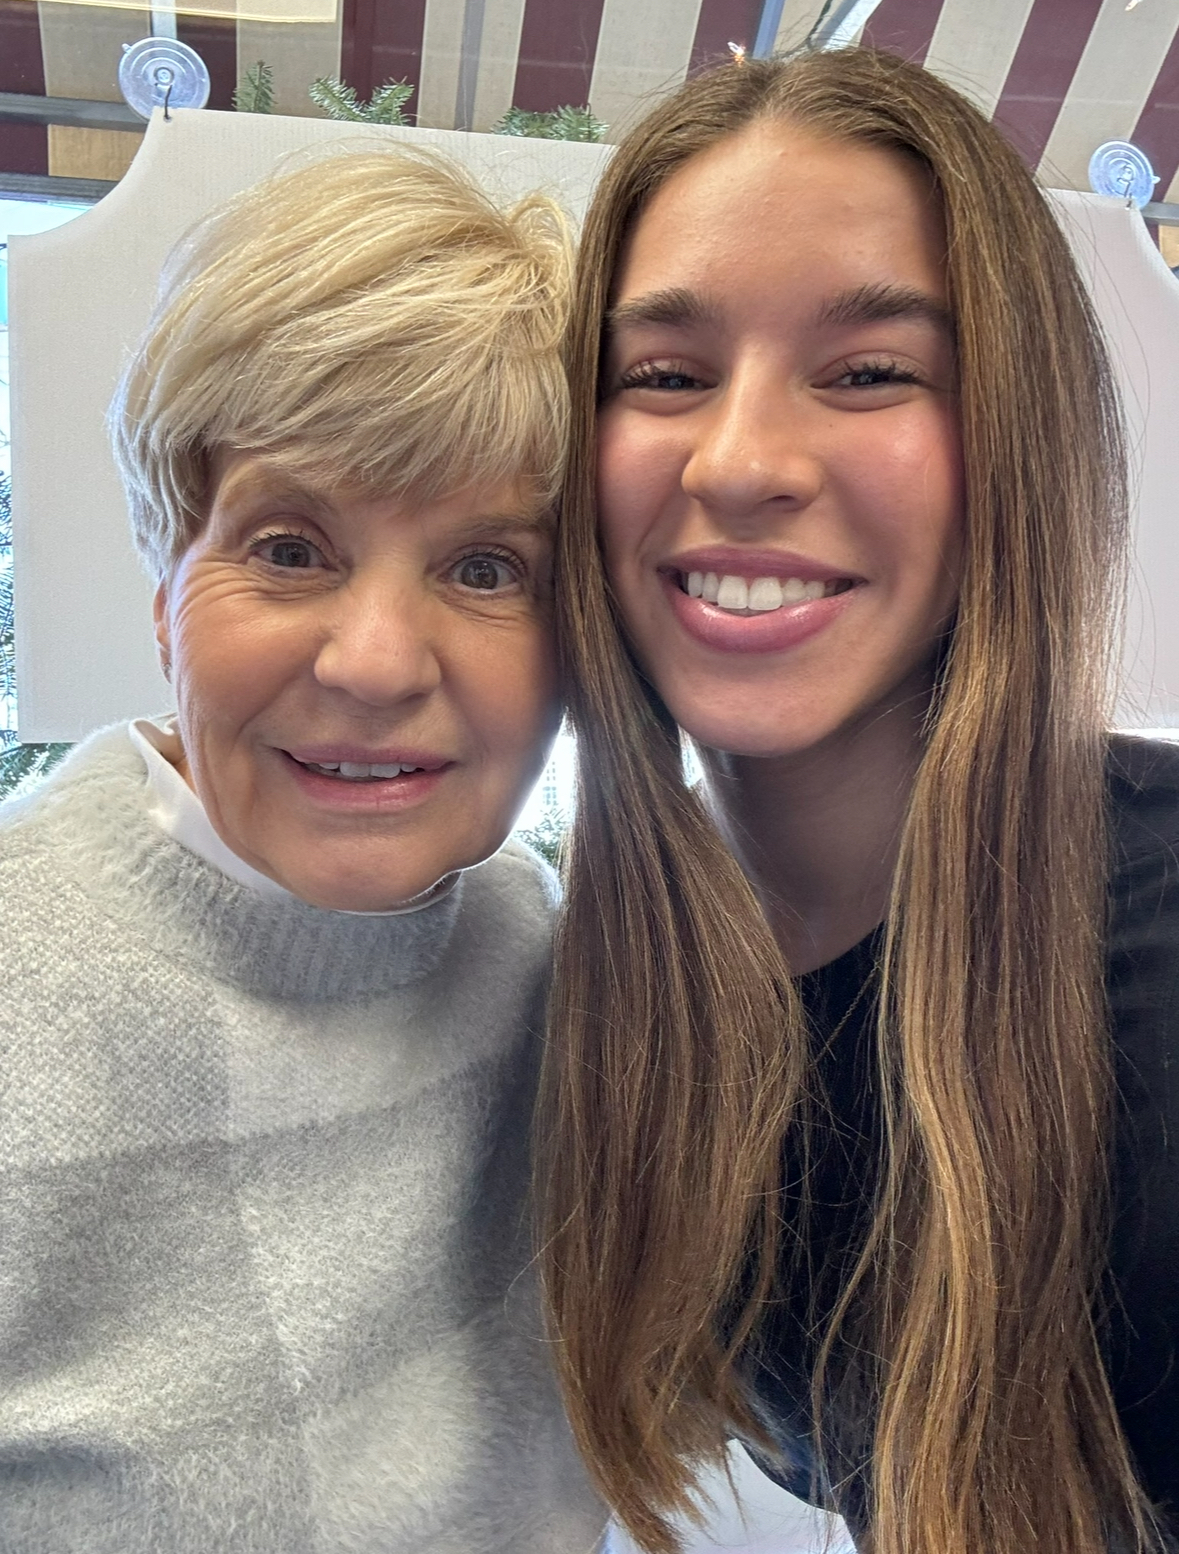 older woman with short blond hair in a sweater next to younger woman with long brown hair and a black shirt